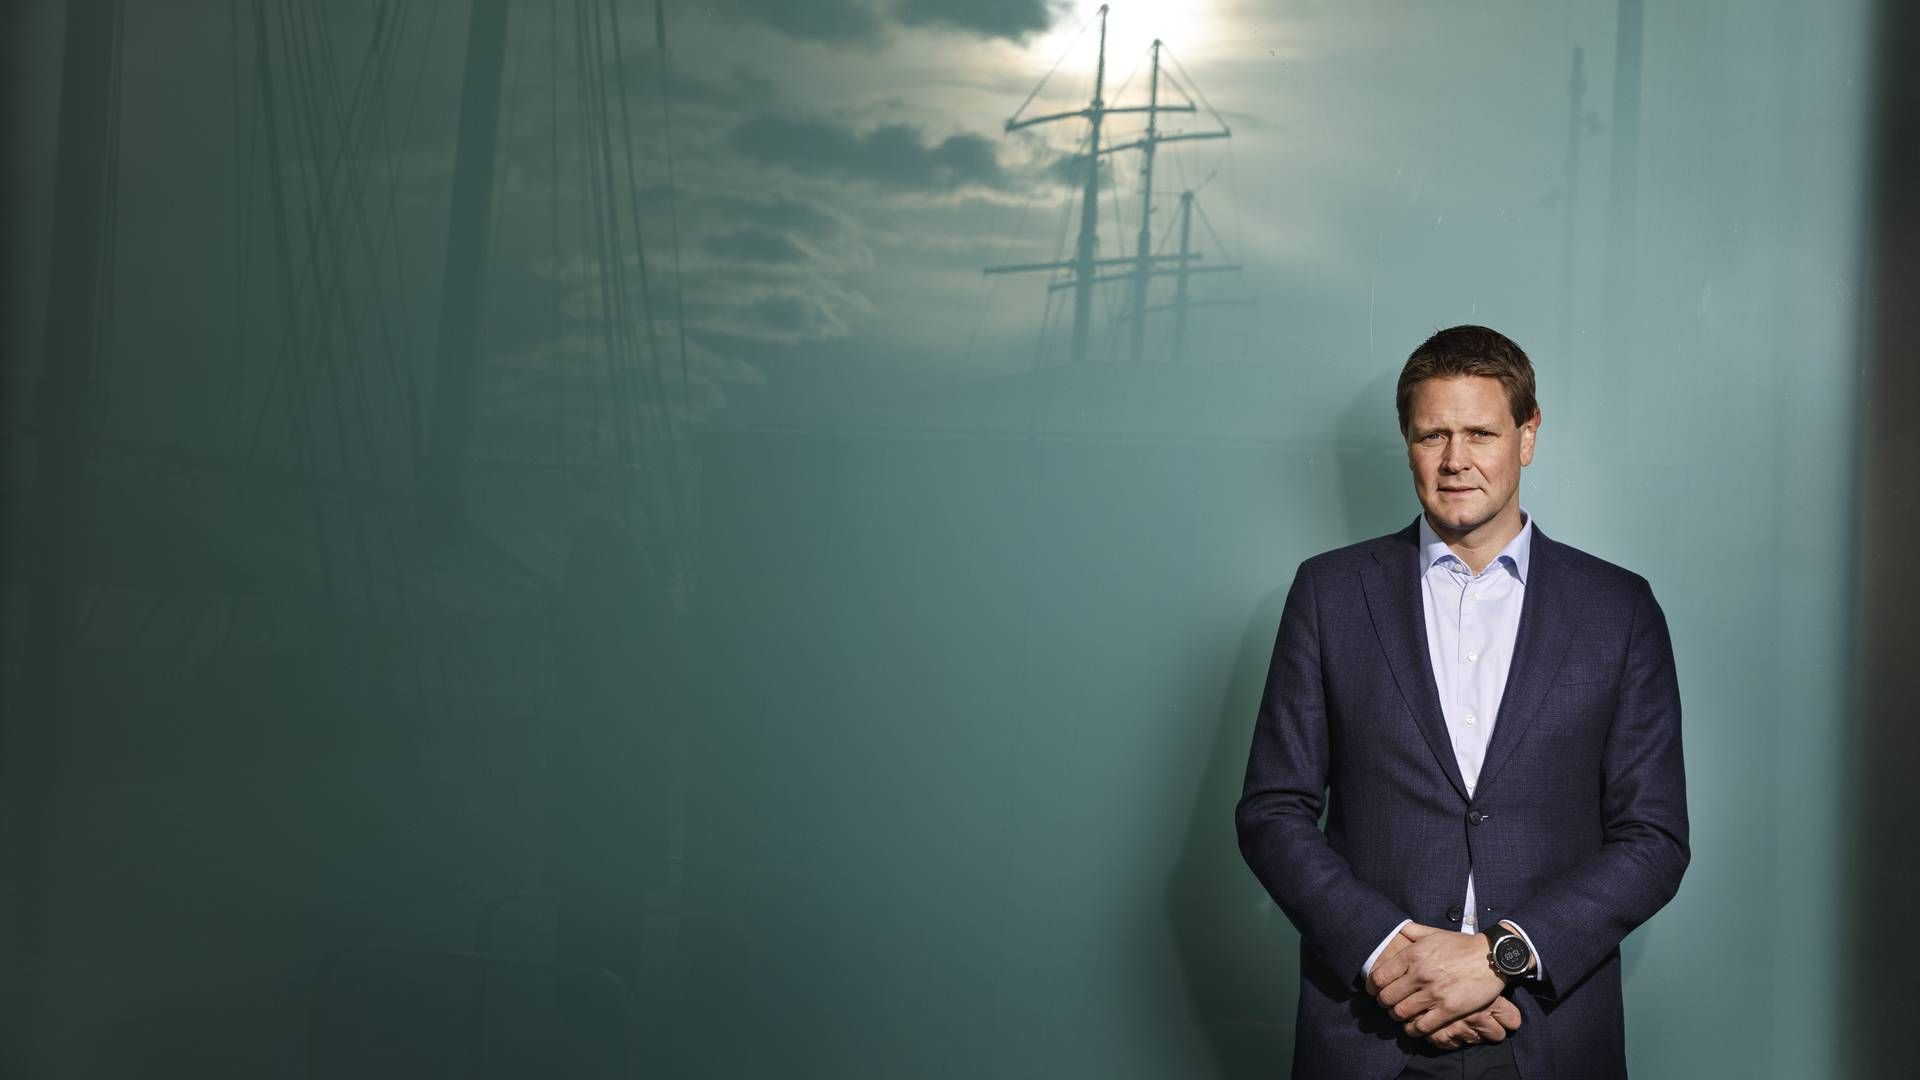 "The EU and Norwegian authorities must take a clear stance on sanctions against oil cargoes from Russia," says Norwegian Shipowners' Association CEO Harald Solberg as cited by NRK. | Photo: Norges Rederiforbund